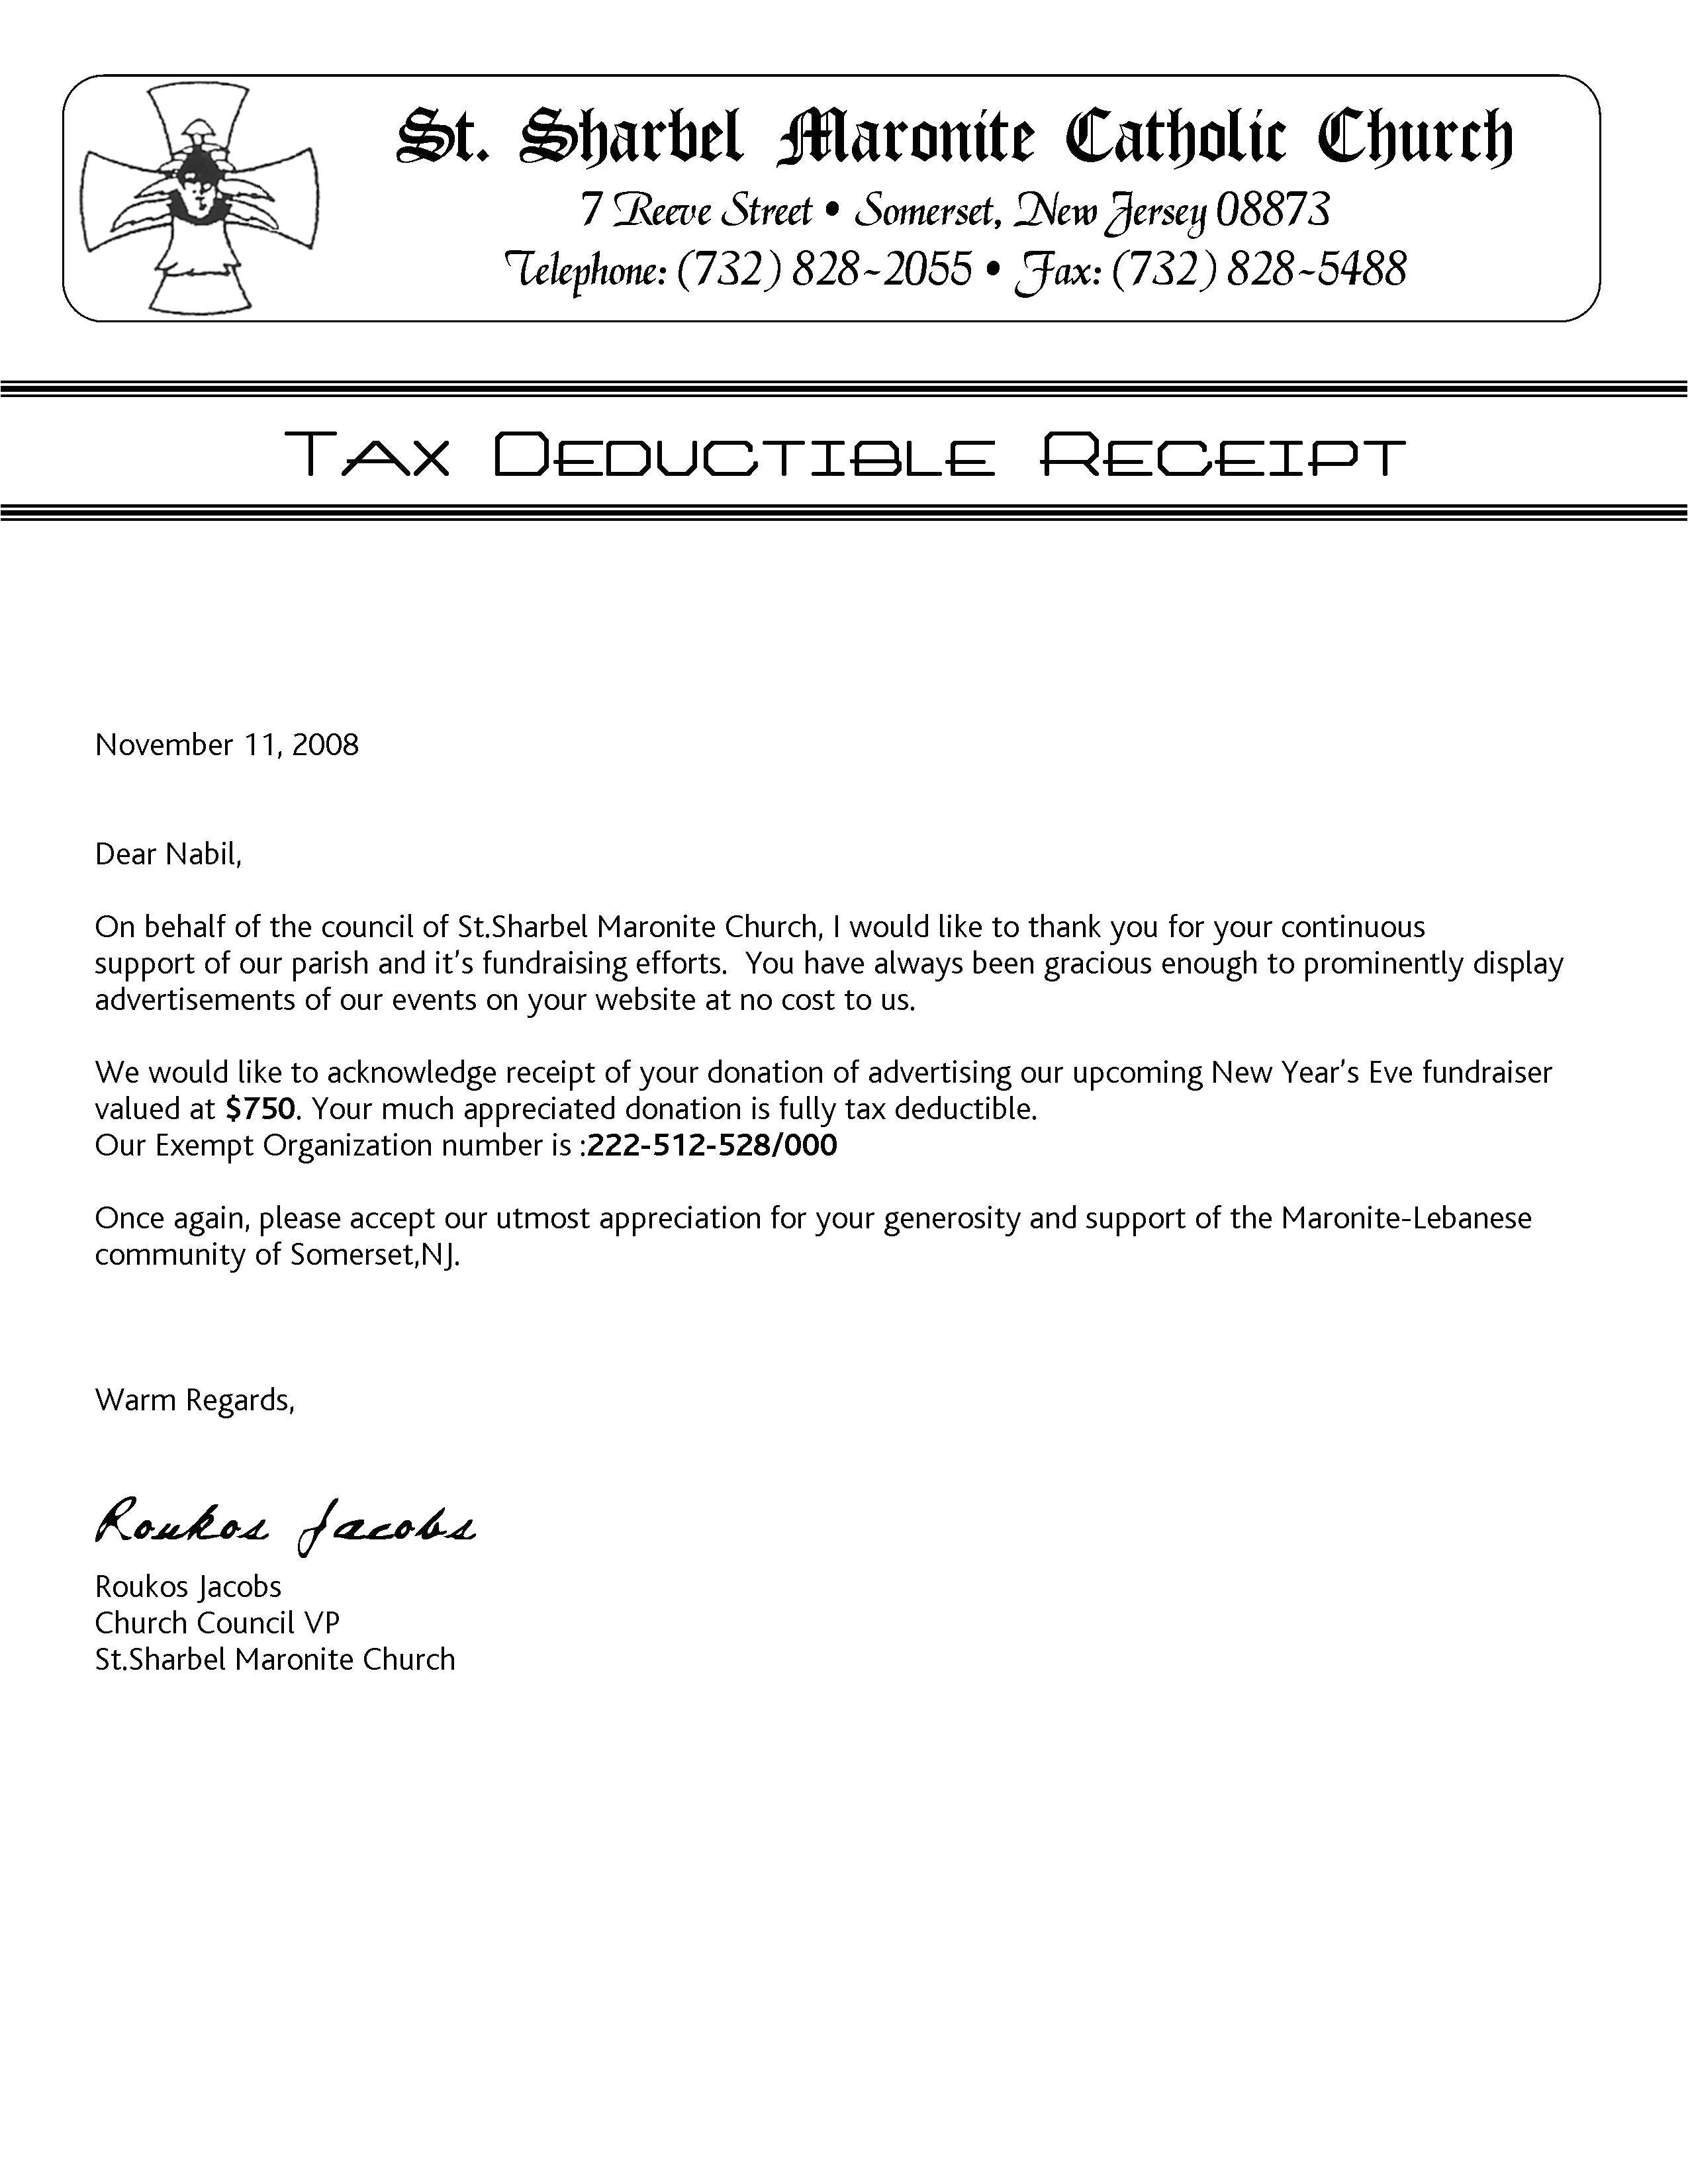 church donation tax letter template